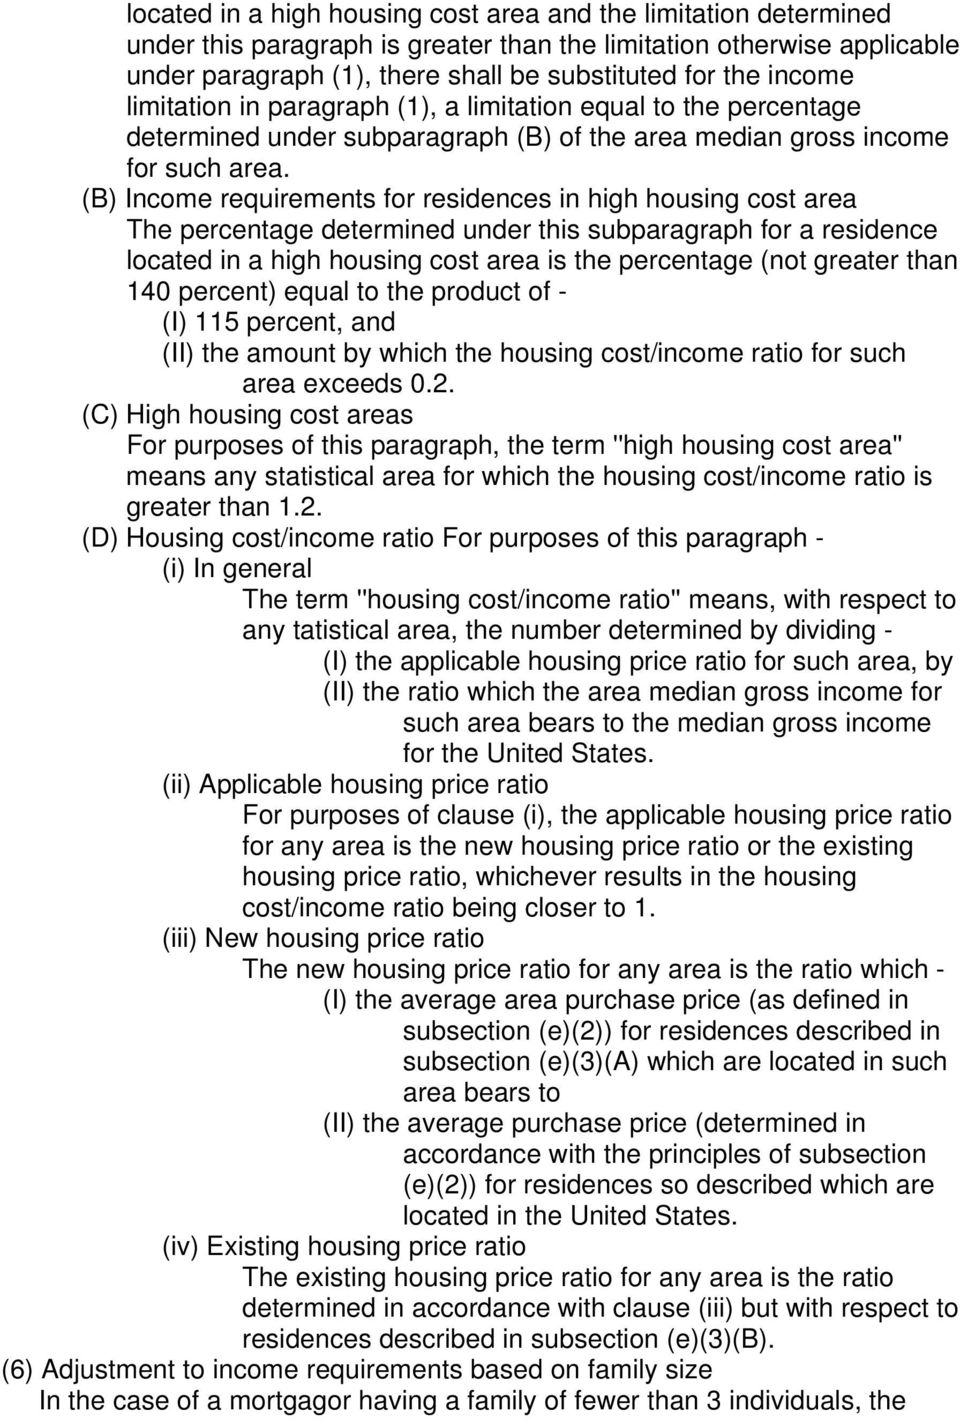 (B) Income requirements for residences in high housing cost area The percentage determined under this subparagraph for a residence located in a high housing cost area is the percentage (not greater